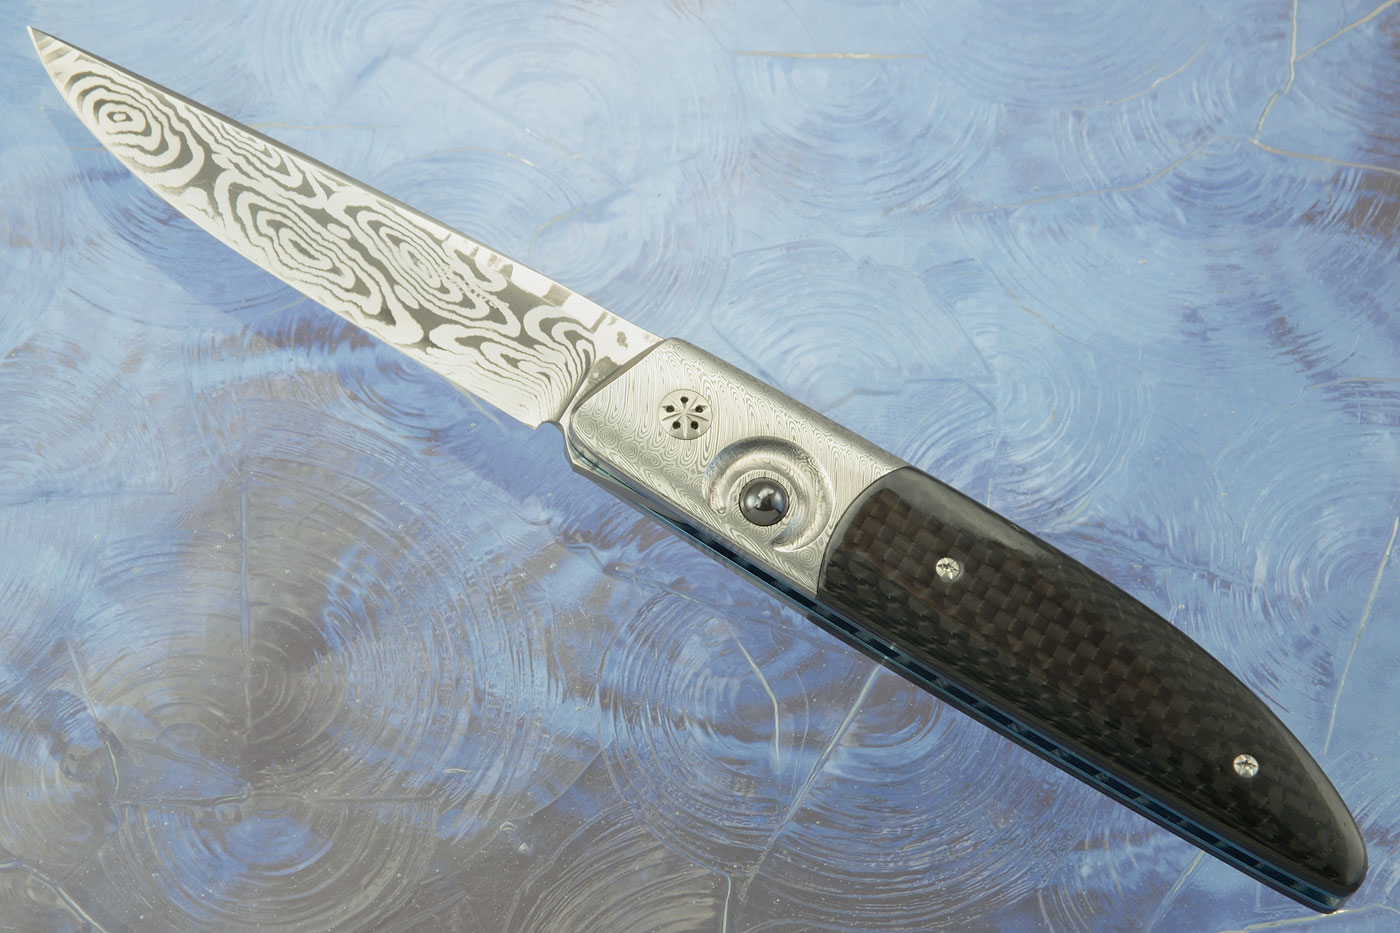 Large Ball Release Front Flipper with Damasteel and Carbon Fiber